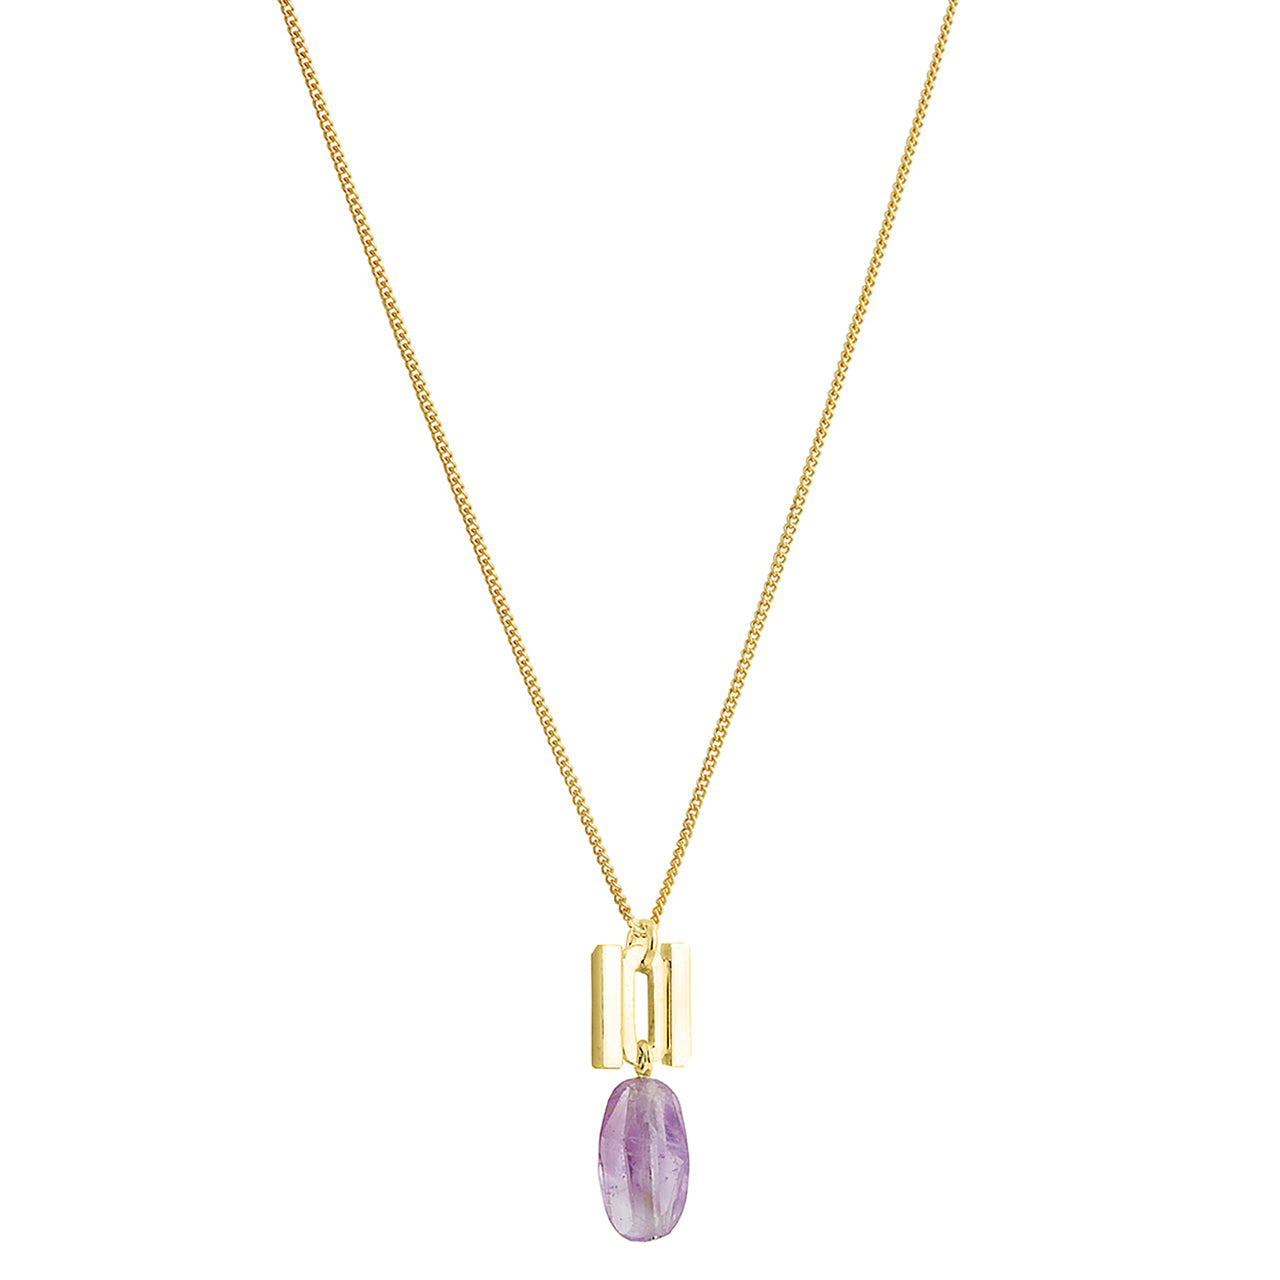 goldplated equal necklace with amethyst